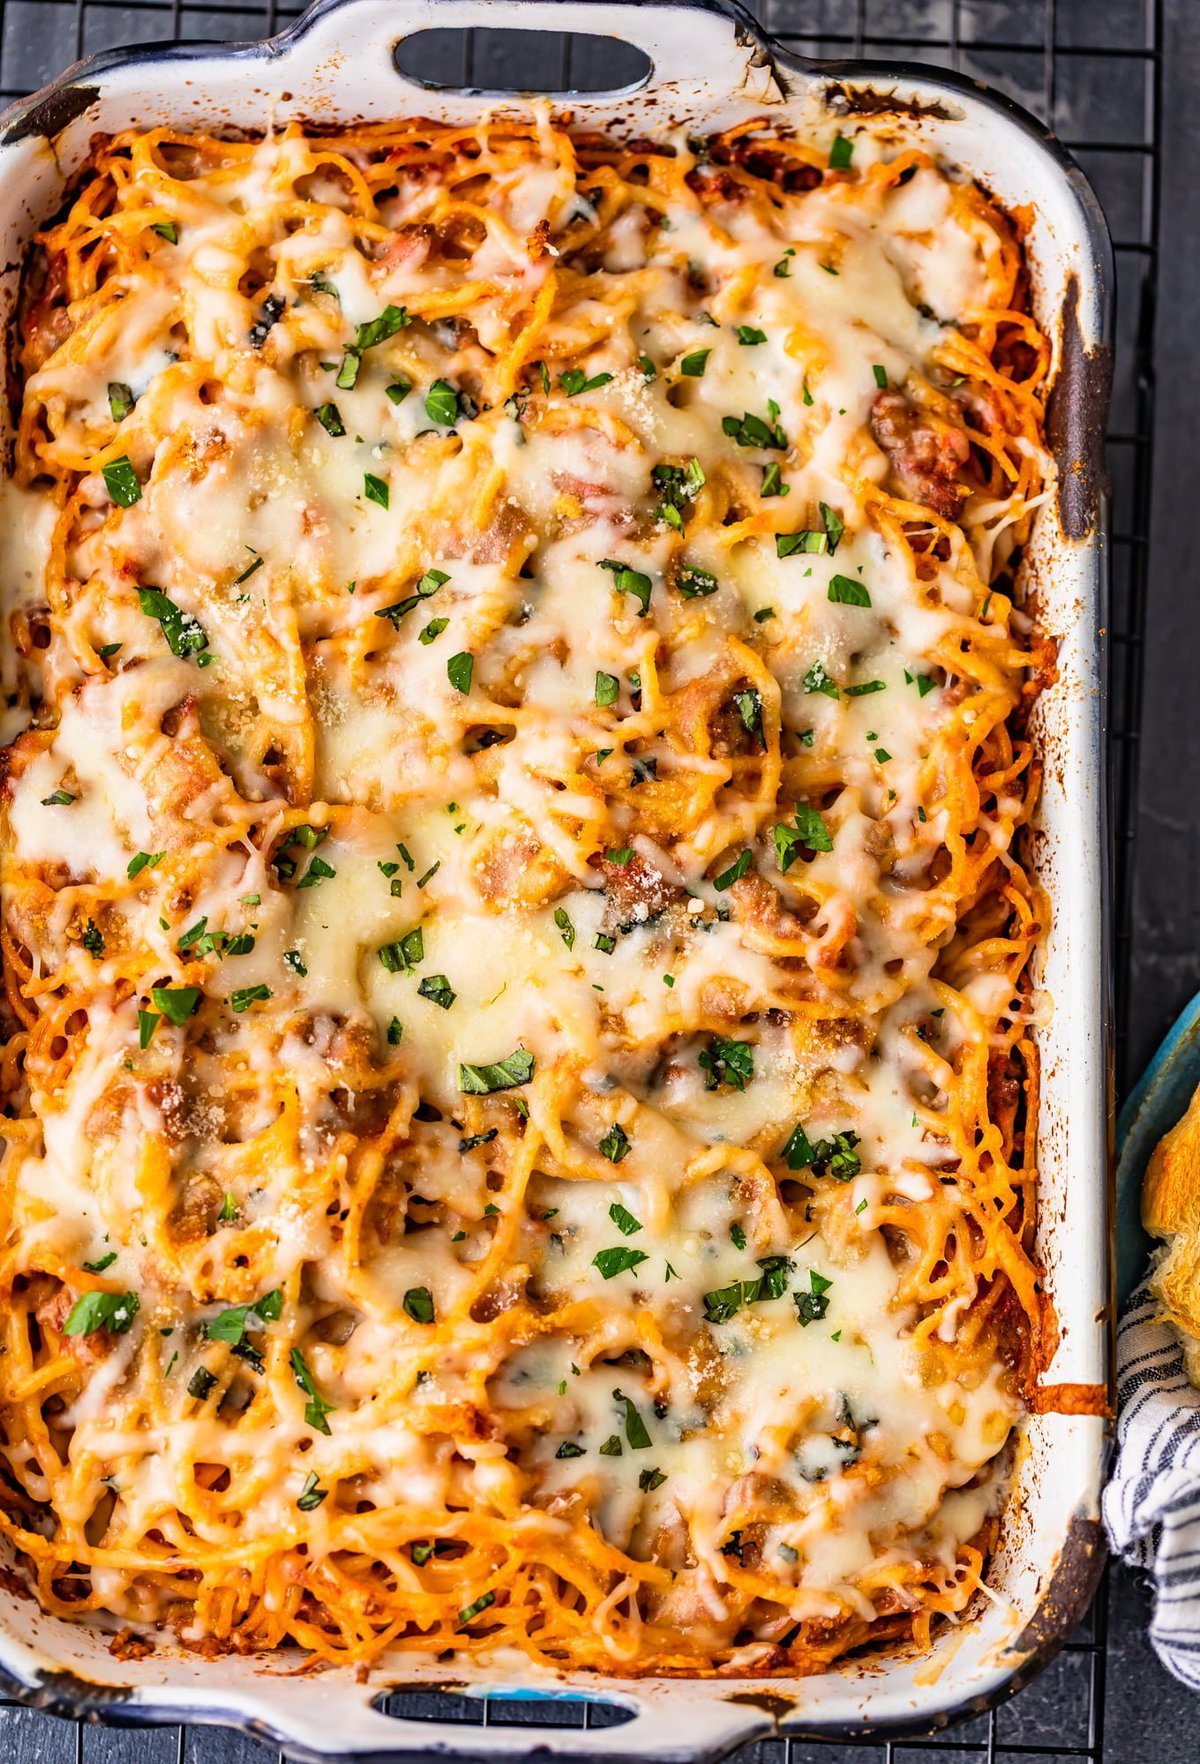 baking dish filled with spaghetti and covered with cheese